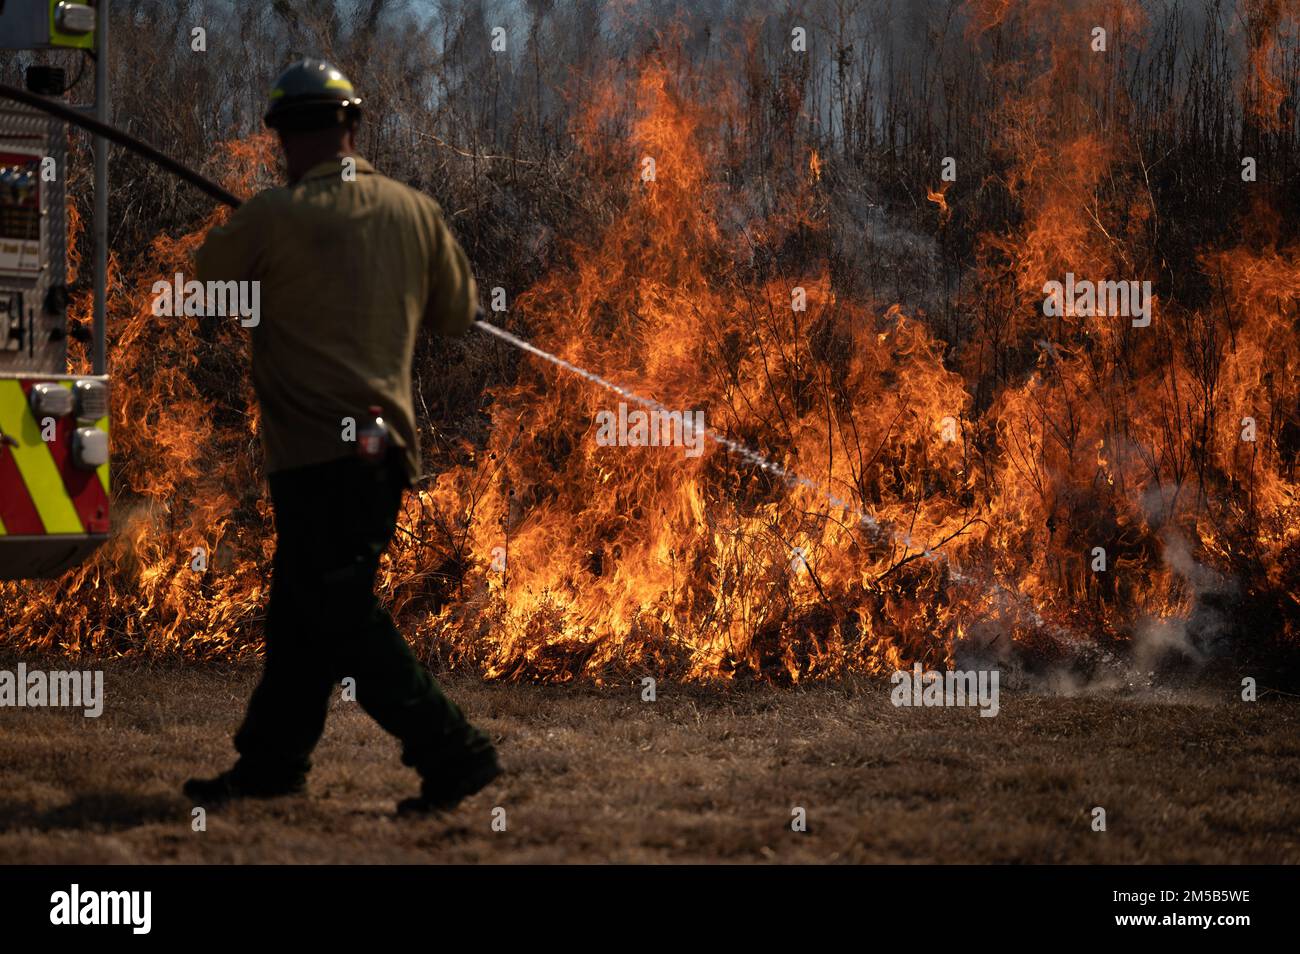 A member of the Air Force Wildland Fire Branch sprays a prescribed wildland brush fire at Dyess Air Force Base, Texas, Feb. 18, 2022. Dyess firefighters and Air Force Wildland firefighters are executing prescribed burns in order to reintroduce fire into the installation’s ecosystem and, as nearly as possible, allow a fire to function in its natural ecological role. Stock Photo